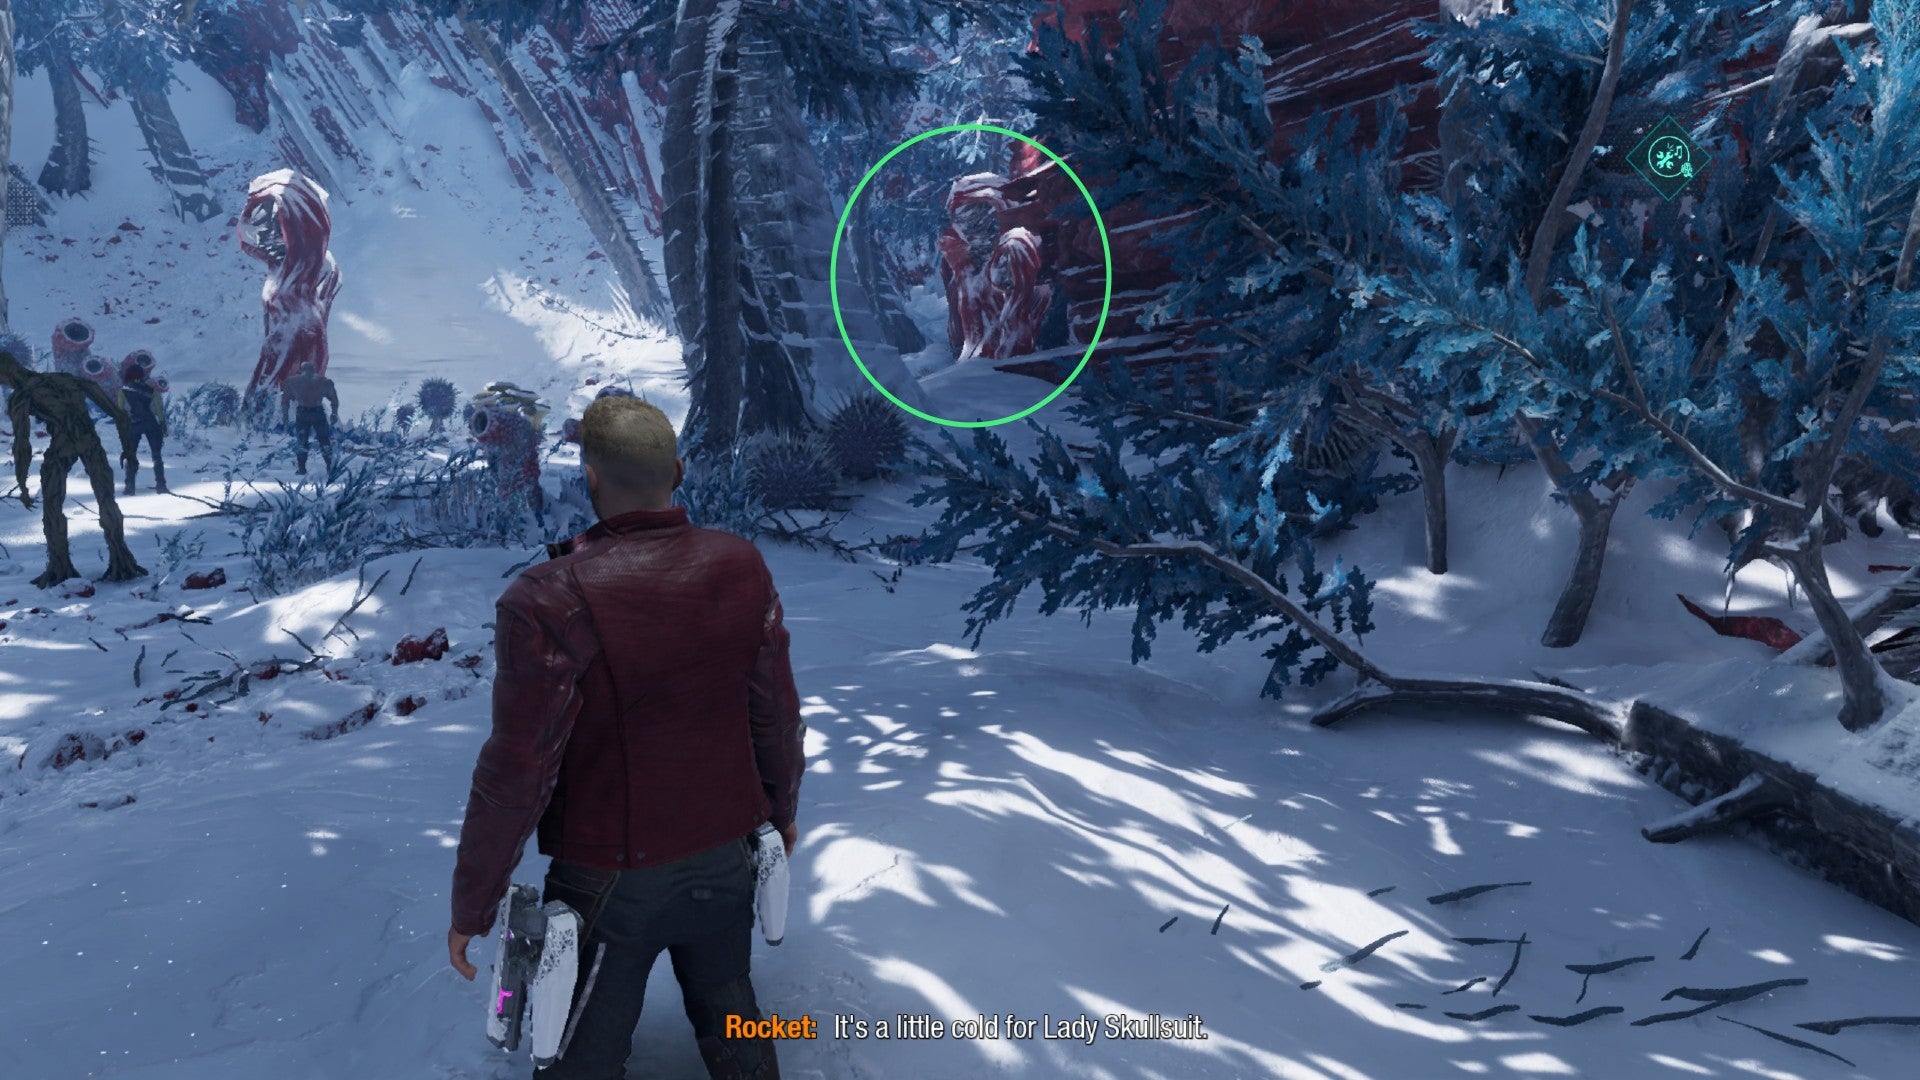 Star-Lord in snowy forest, other Guardians are nearby, red plants are circled